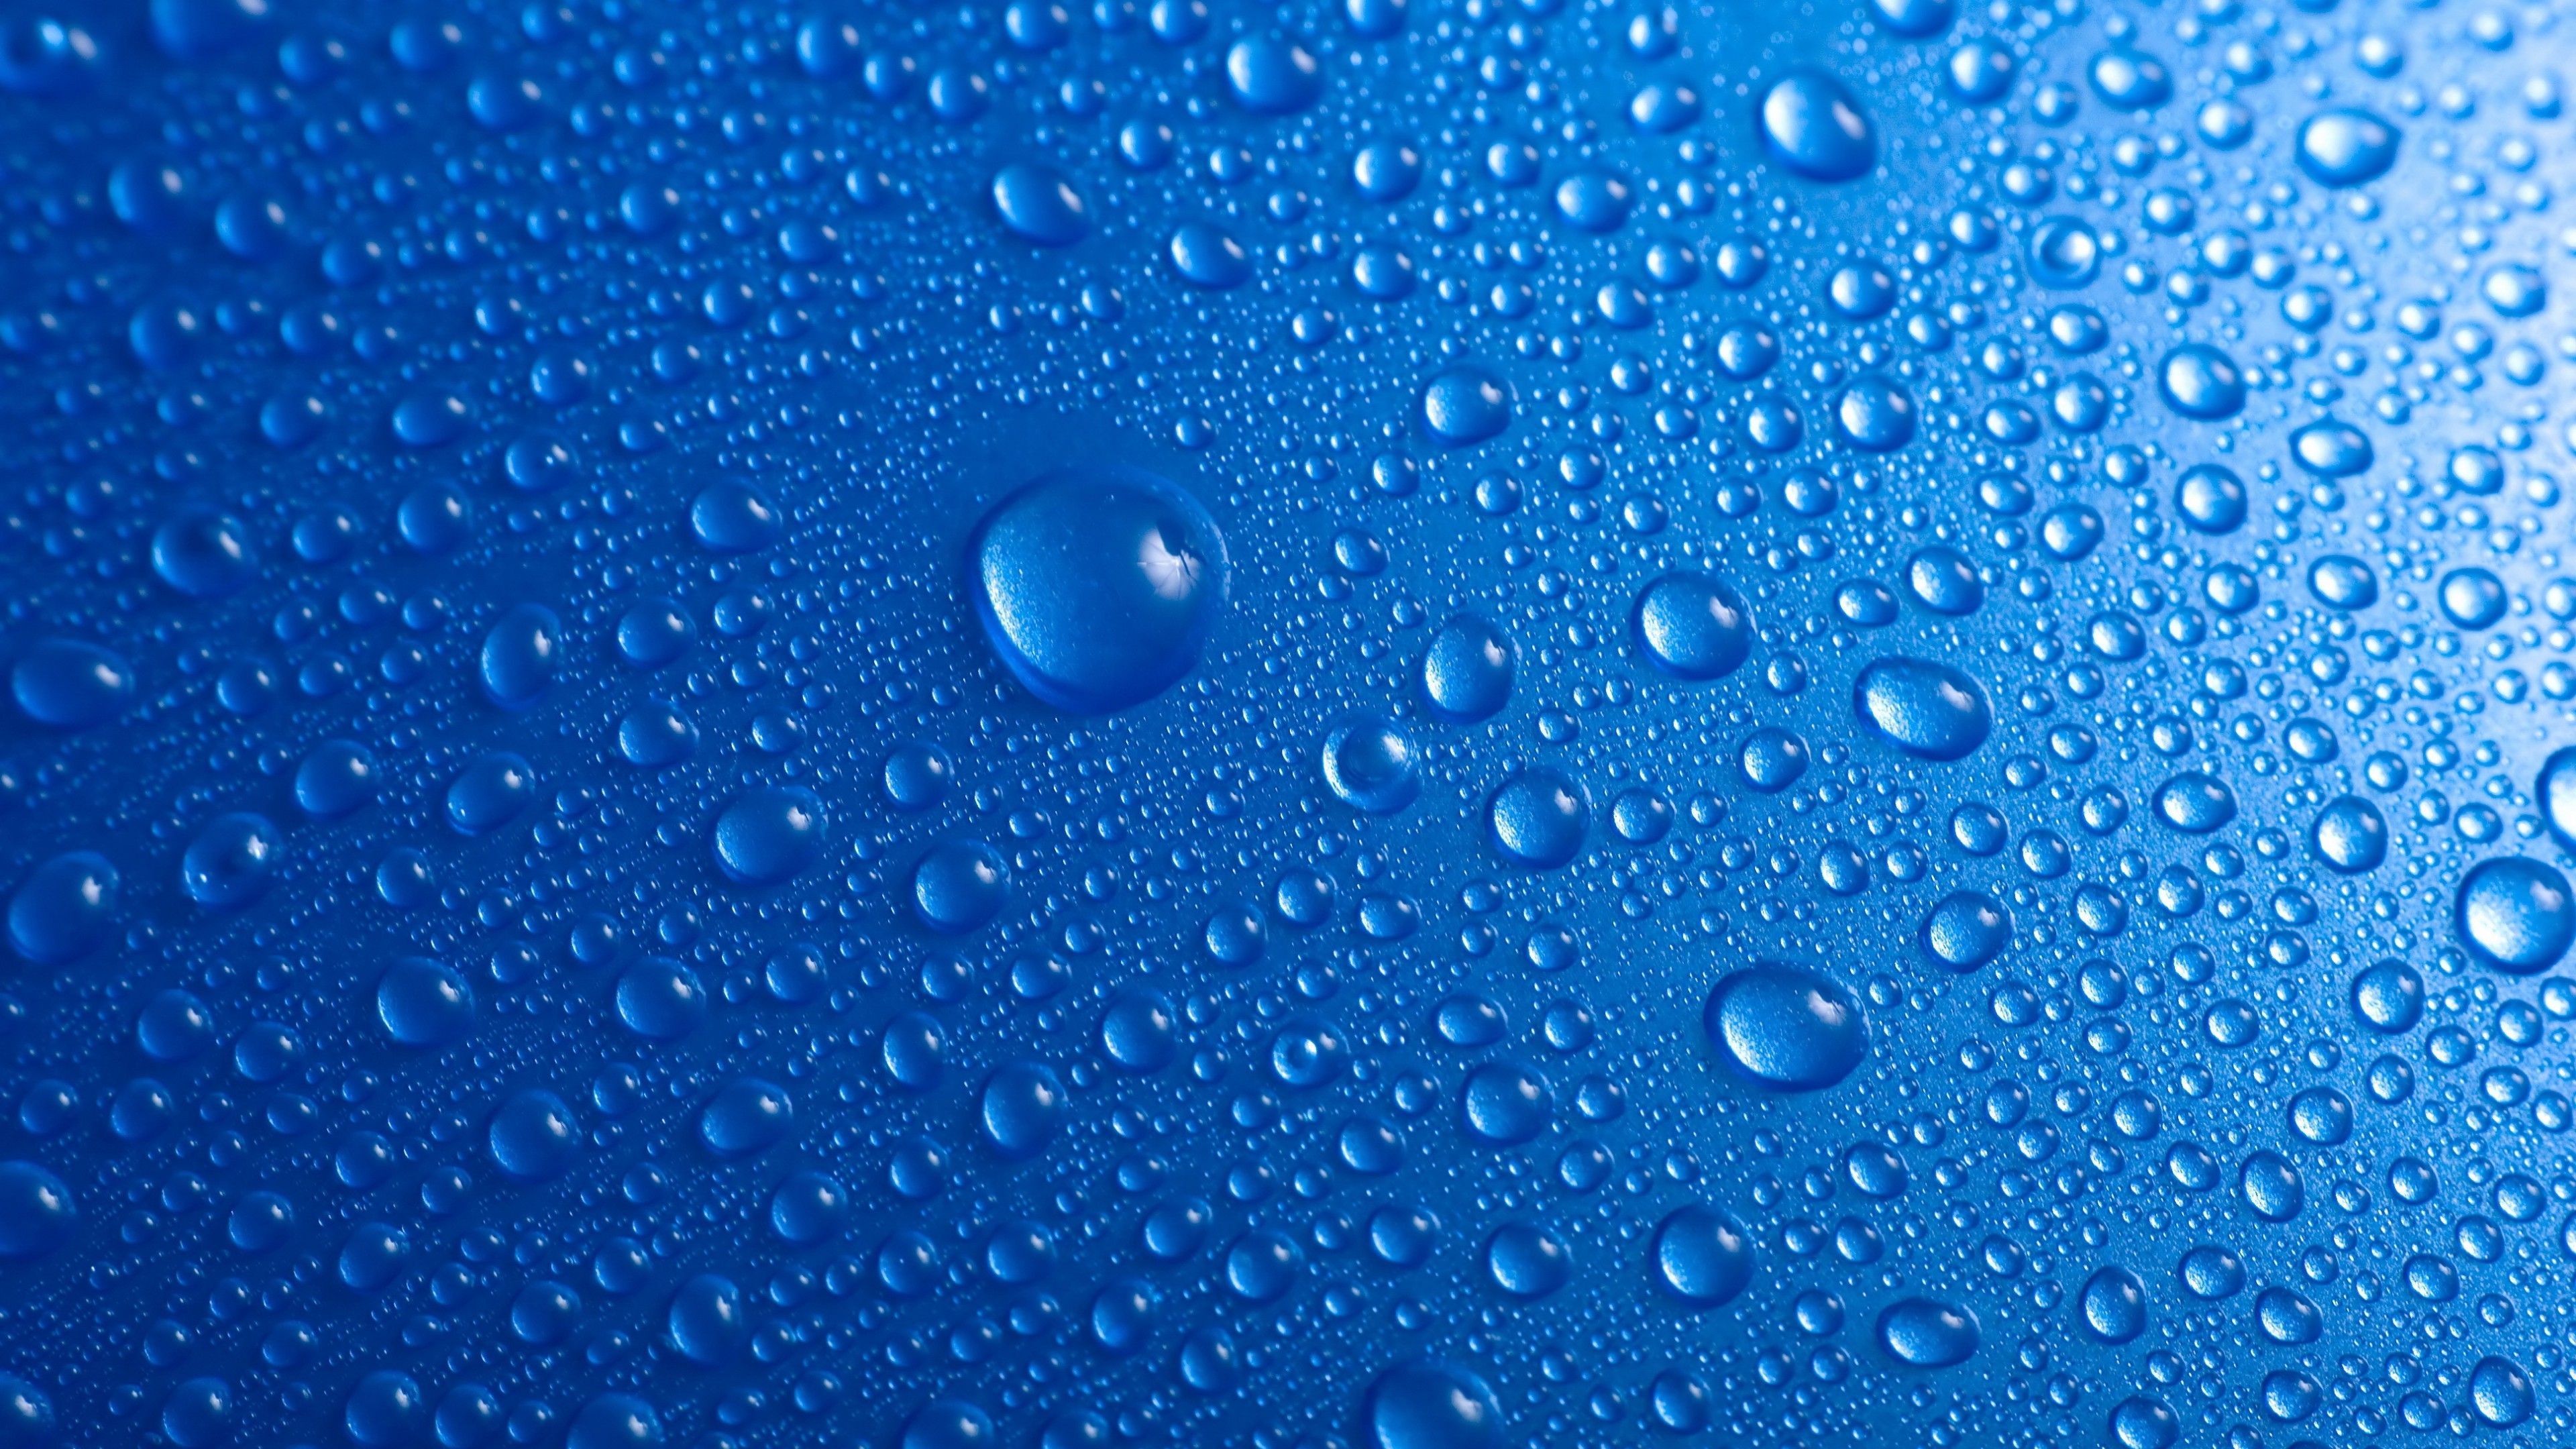 Water Droplets 4k 720P HD 4k Wallpaper, Image, Background, Photo and Picture